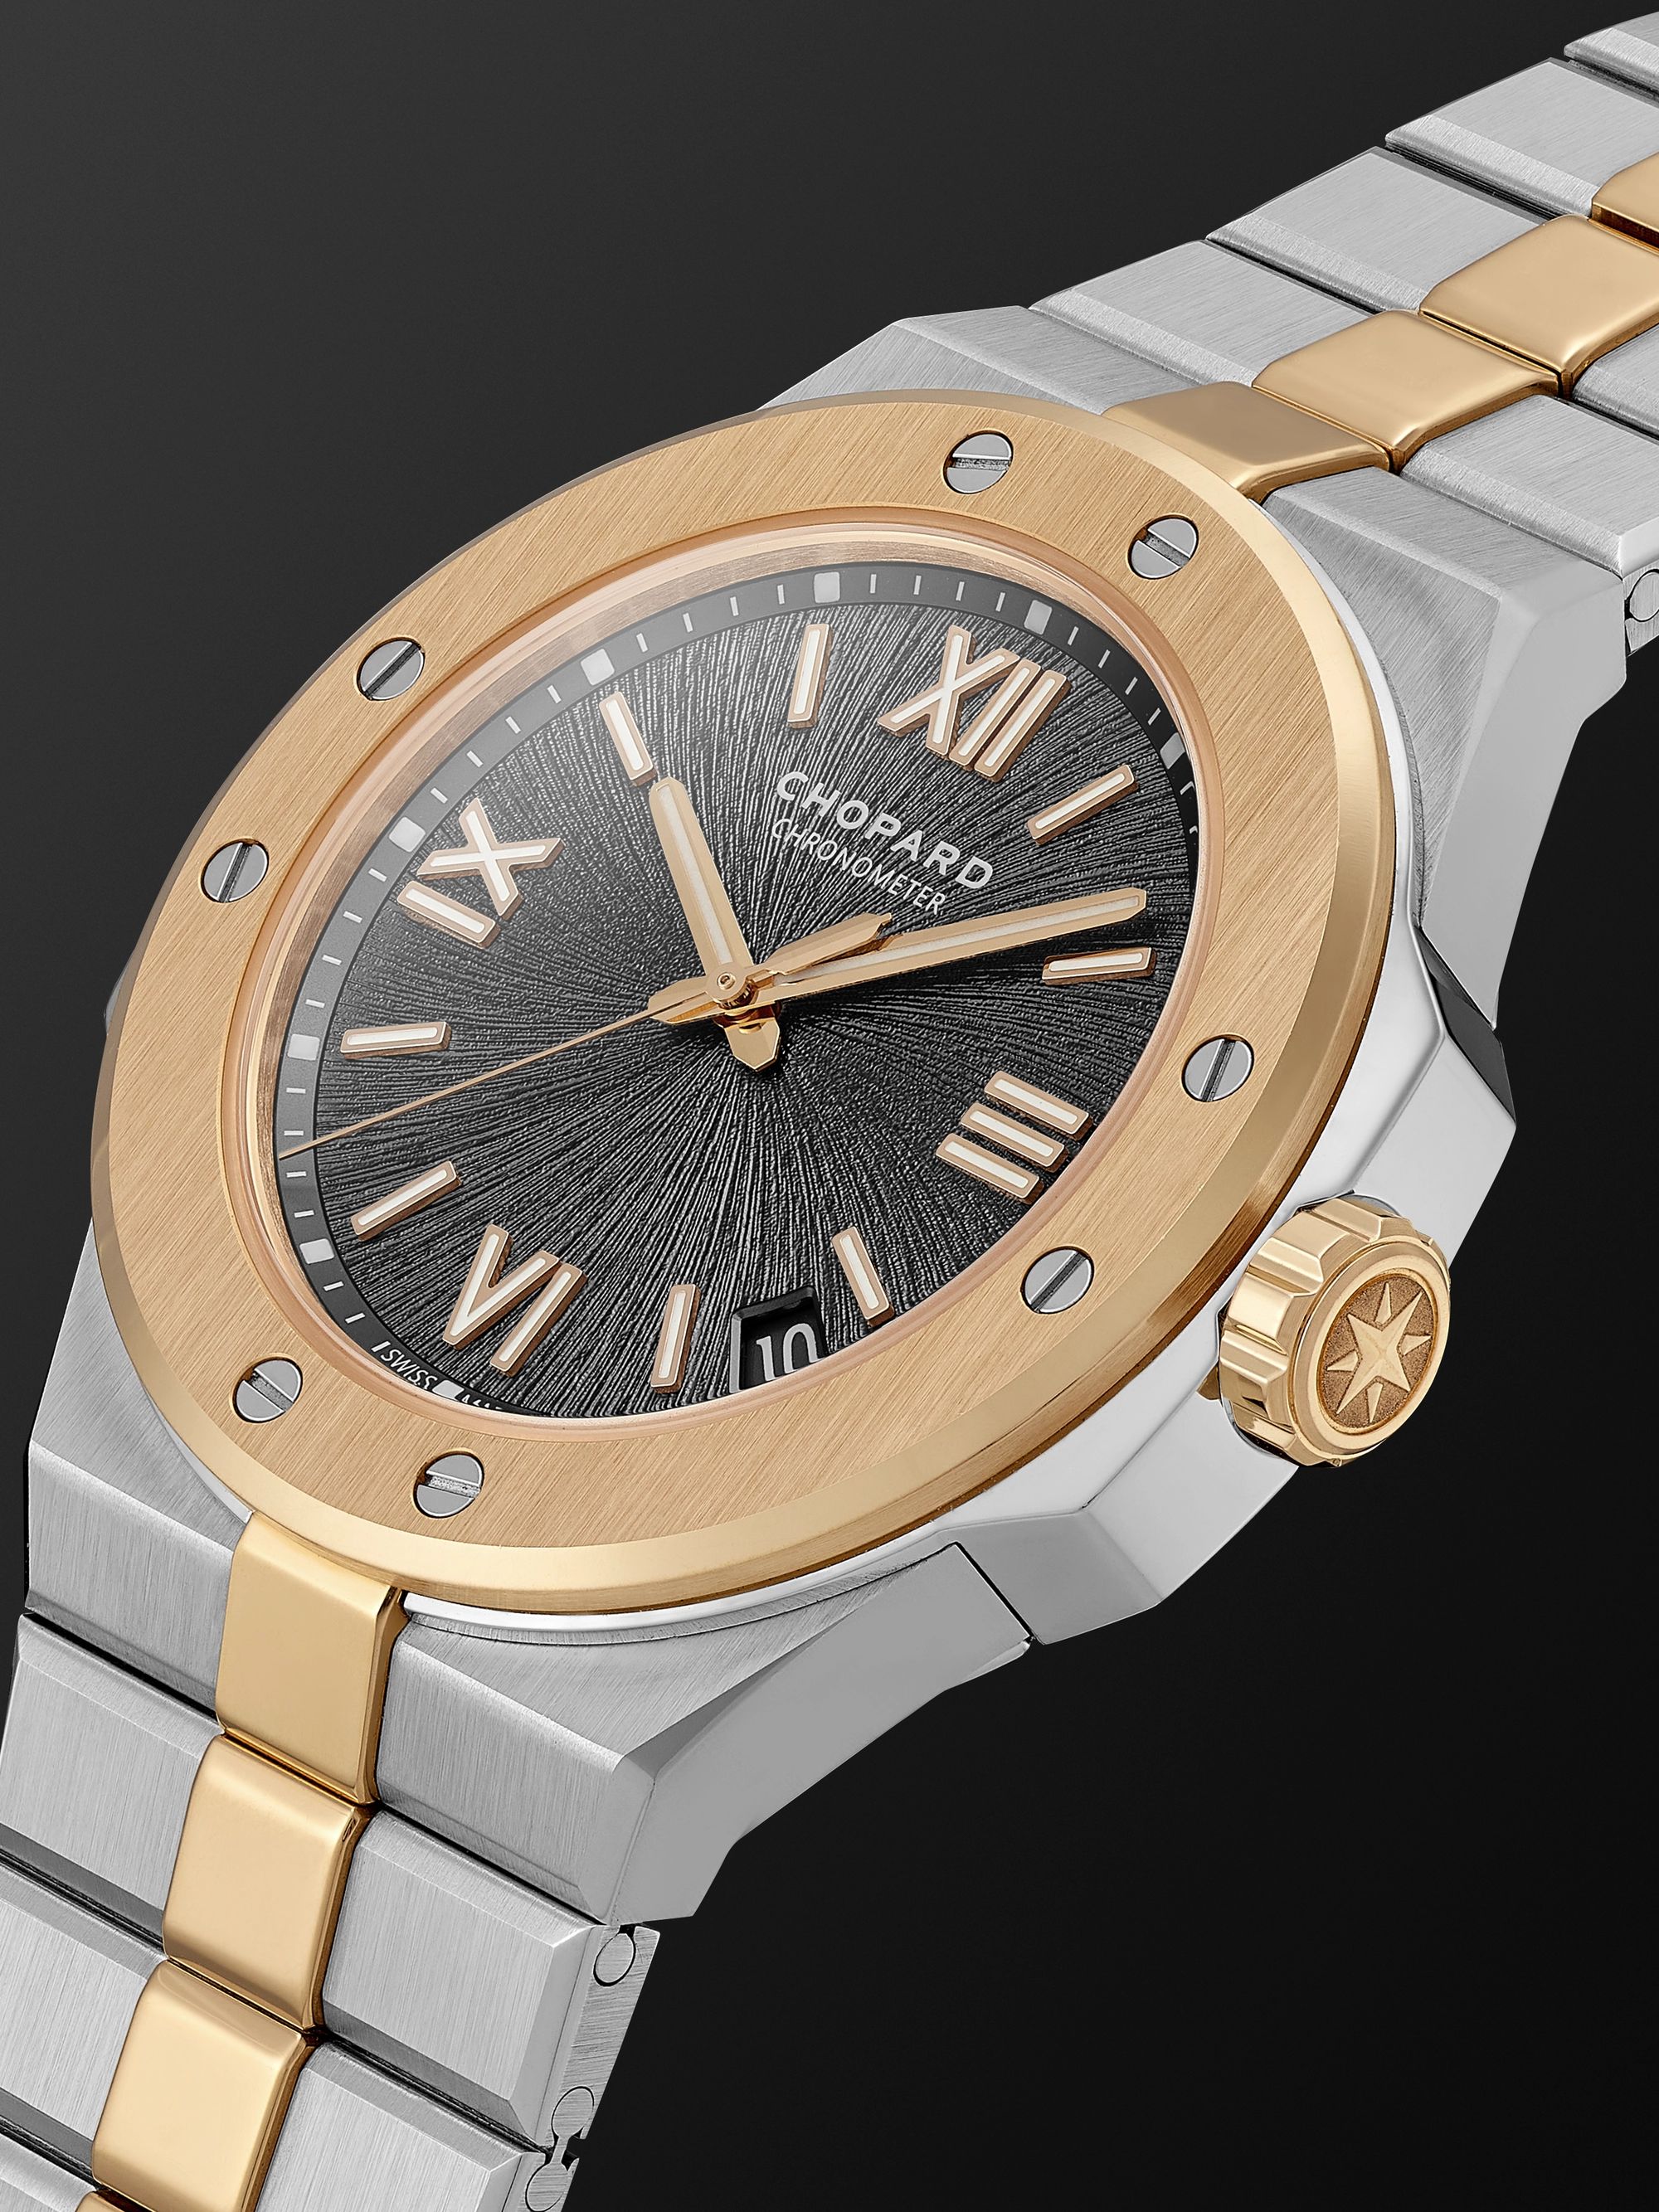 CHOPARD Alpine Eagle Large Automatic 41mm Lucent Steel and 18-Karat Rose Gold Watch, Ref. No. 298600-6001